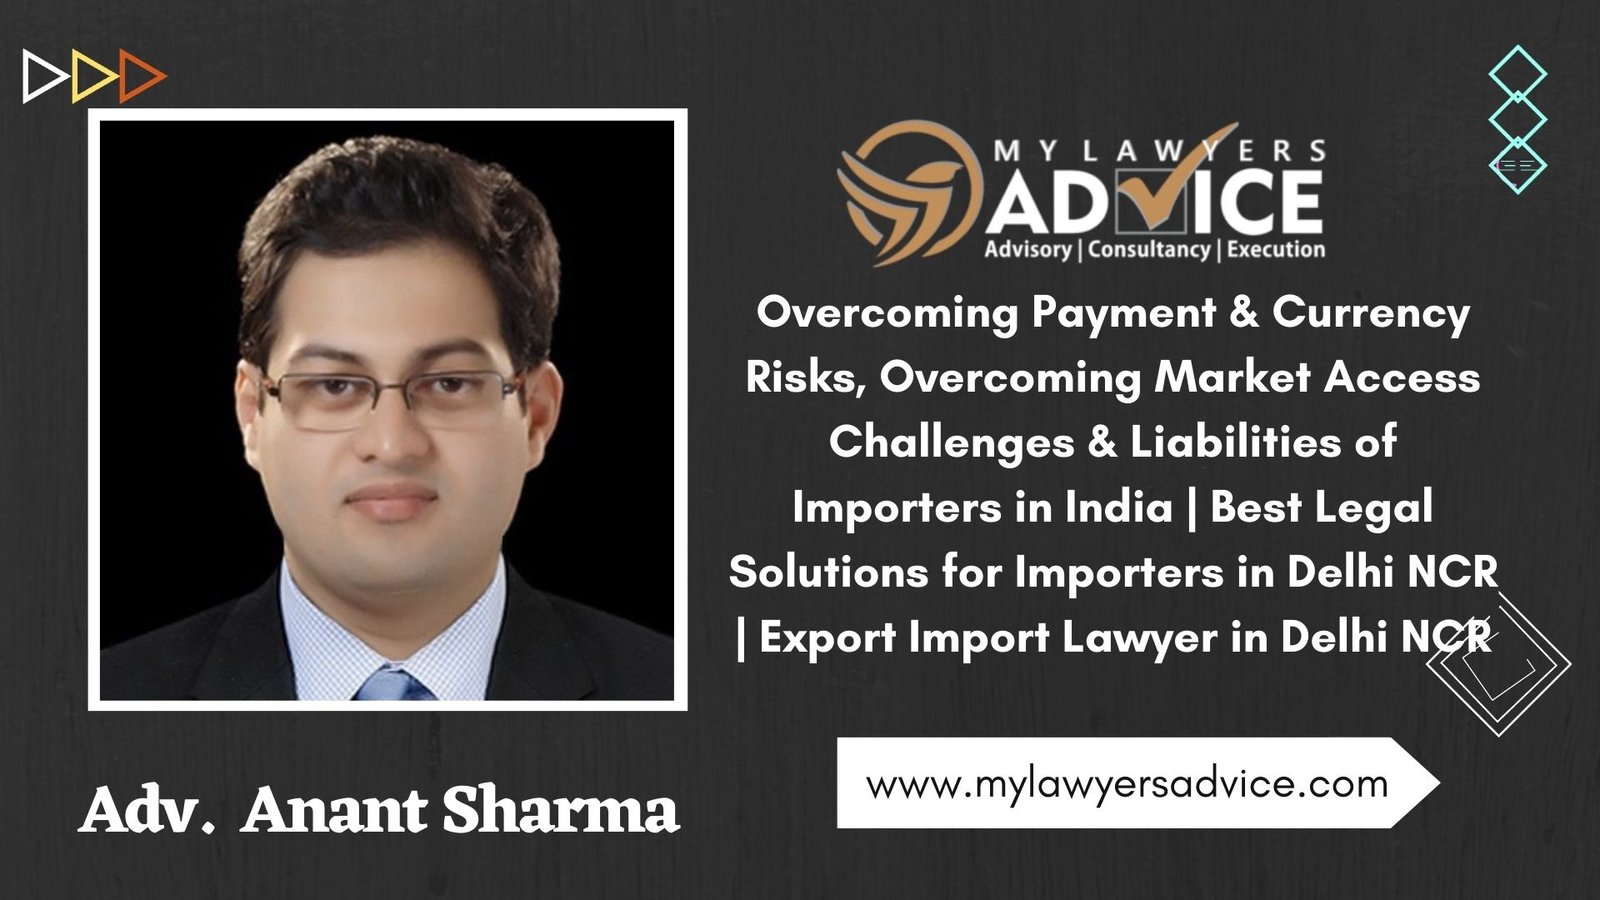 Overcoming Payment & Currency Risks, Overcoming Market Access Challenges & Liabilities of Importers in India | Best Legal Solutions for Importers in Delhi NCR | Export Import Lawyer in Delhi NCR - Best and Experienced Lawyers online in India